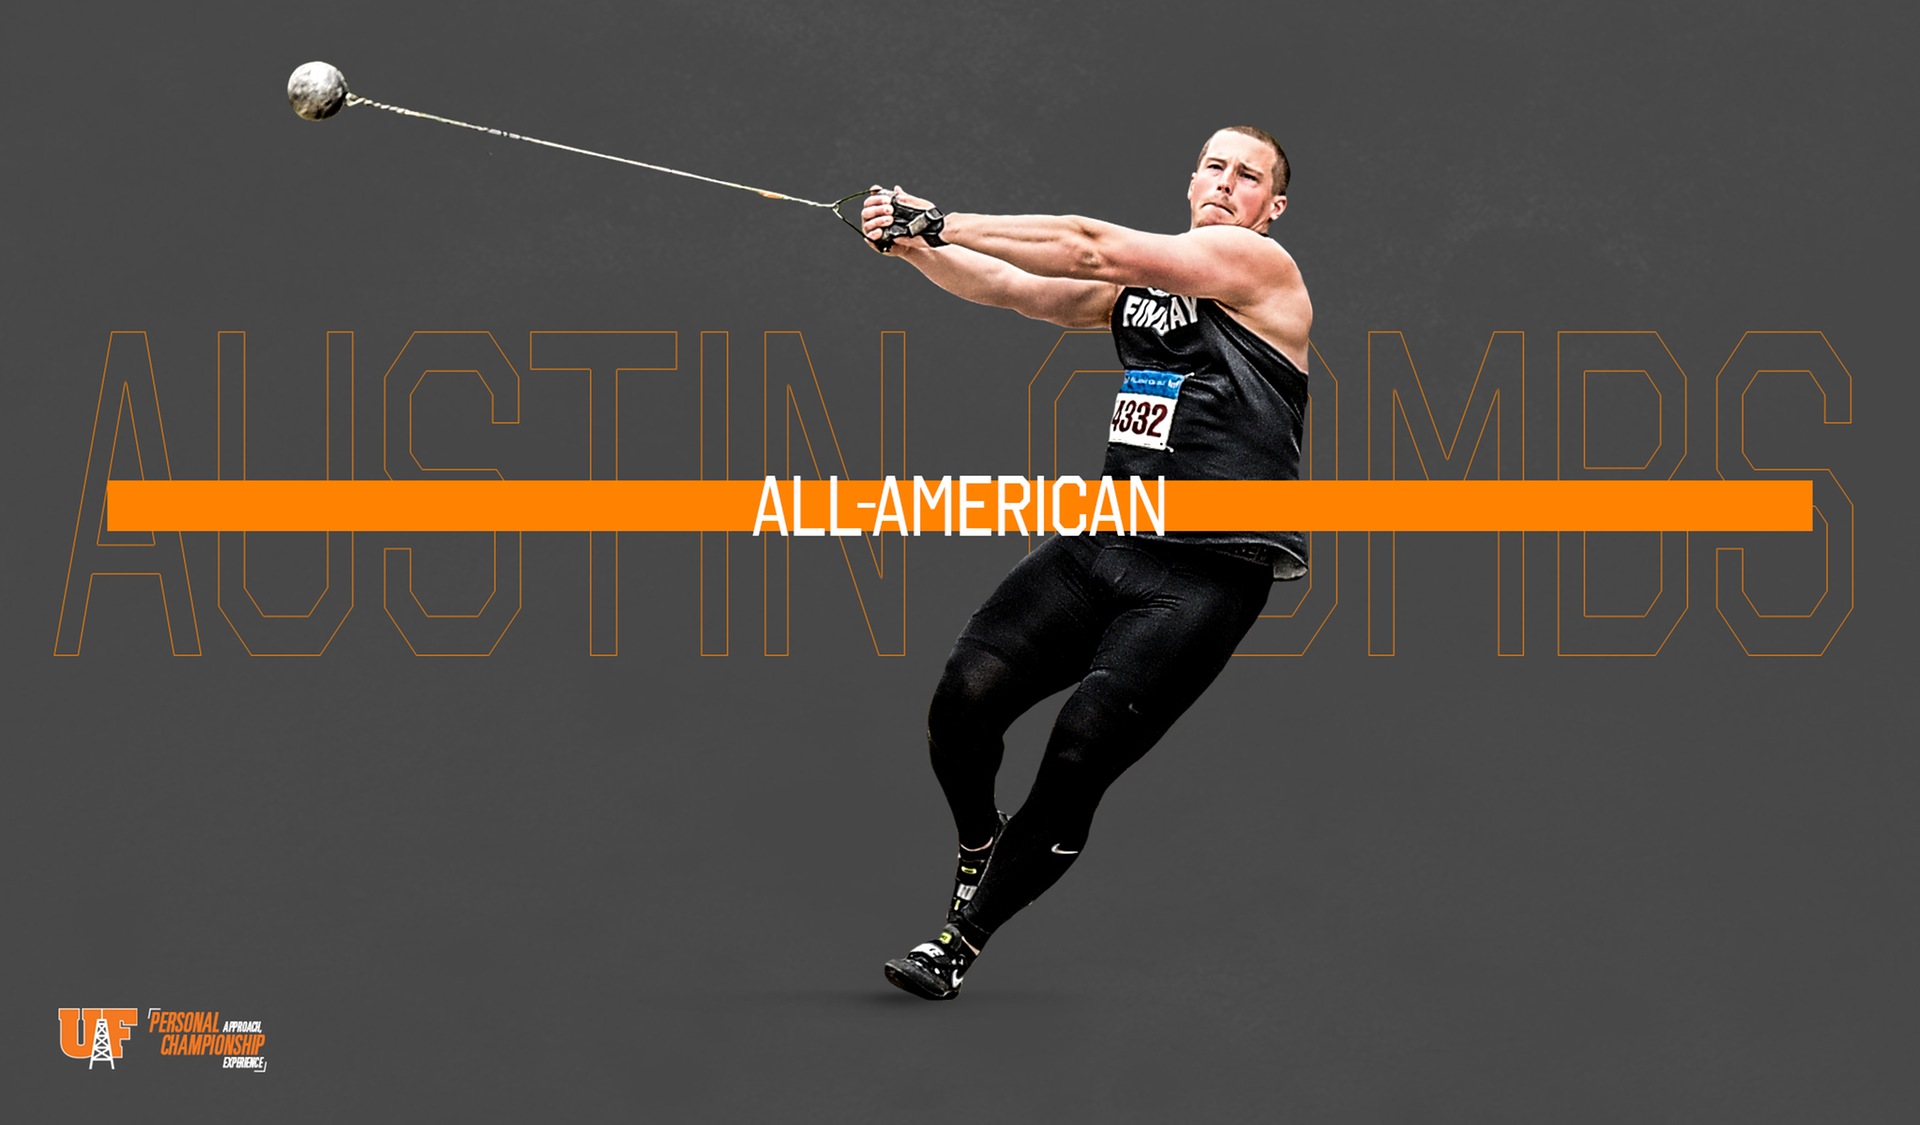 Combs Earns All-American Honors in Hammer Throw